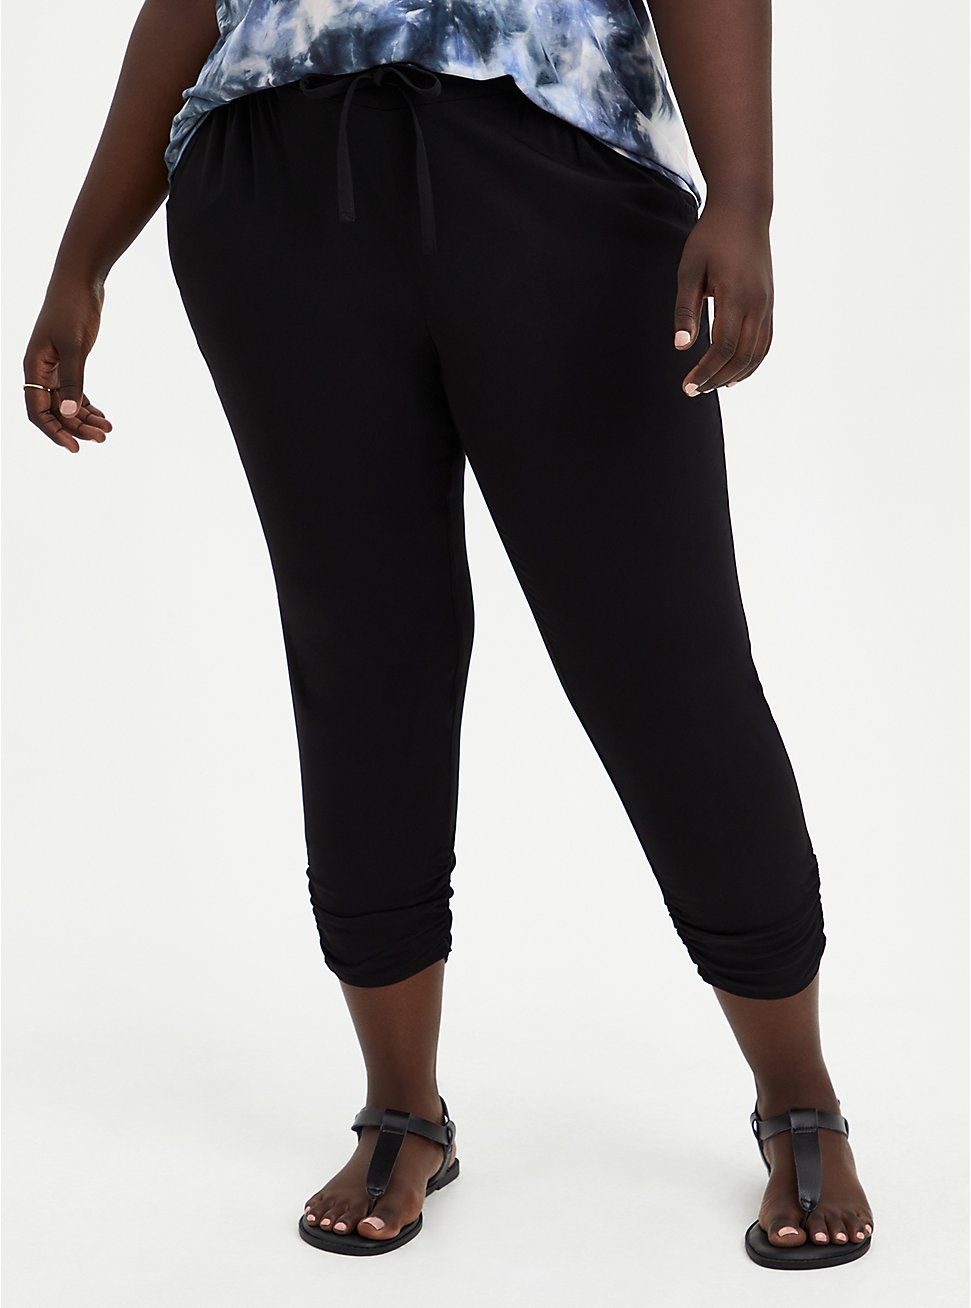 Relaxed Fit Ruched Jogger - Stretch Challis Black, DEEP BLACK, hi-res